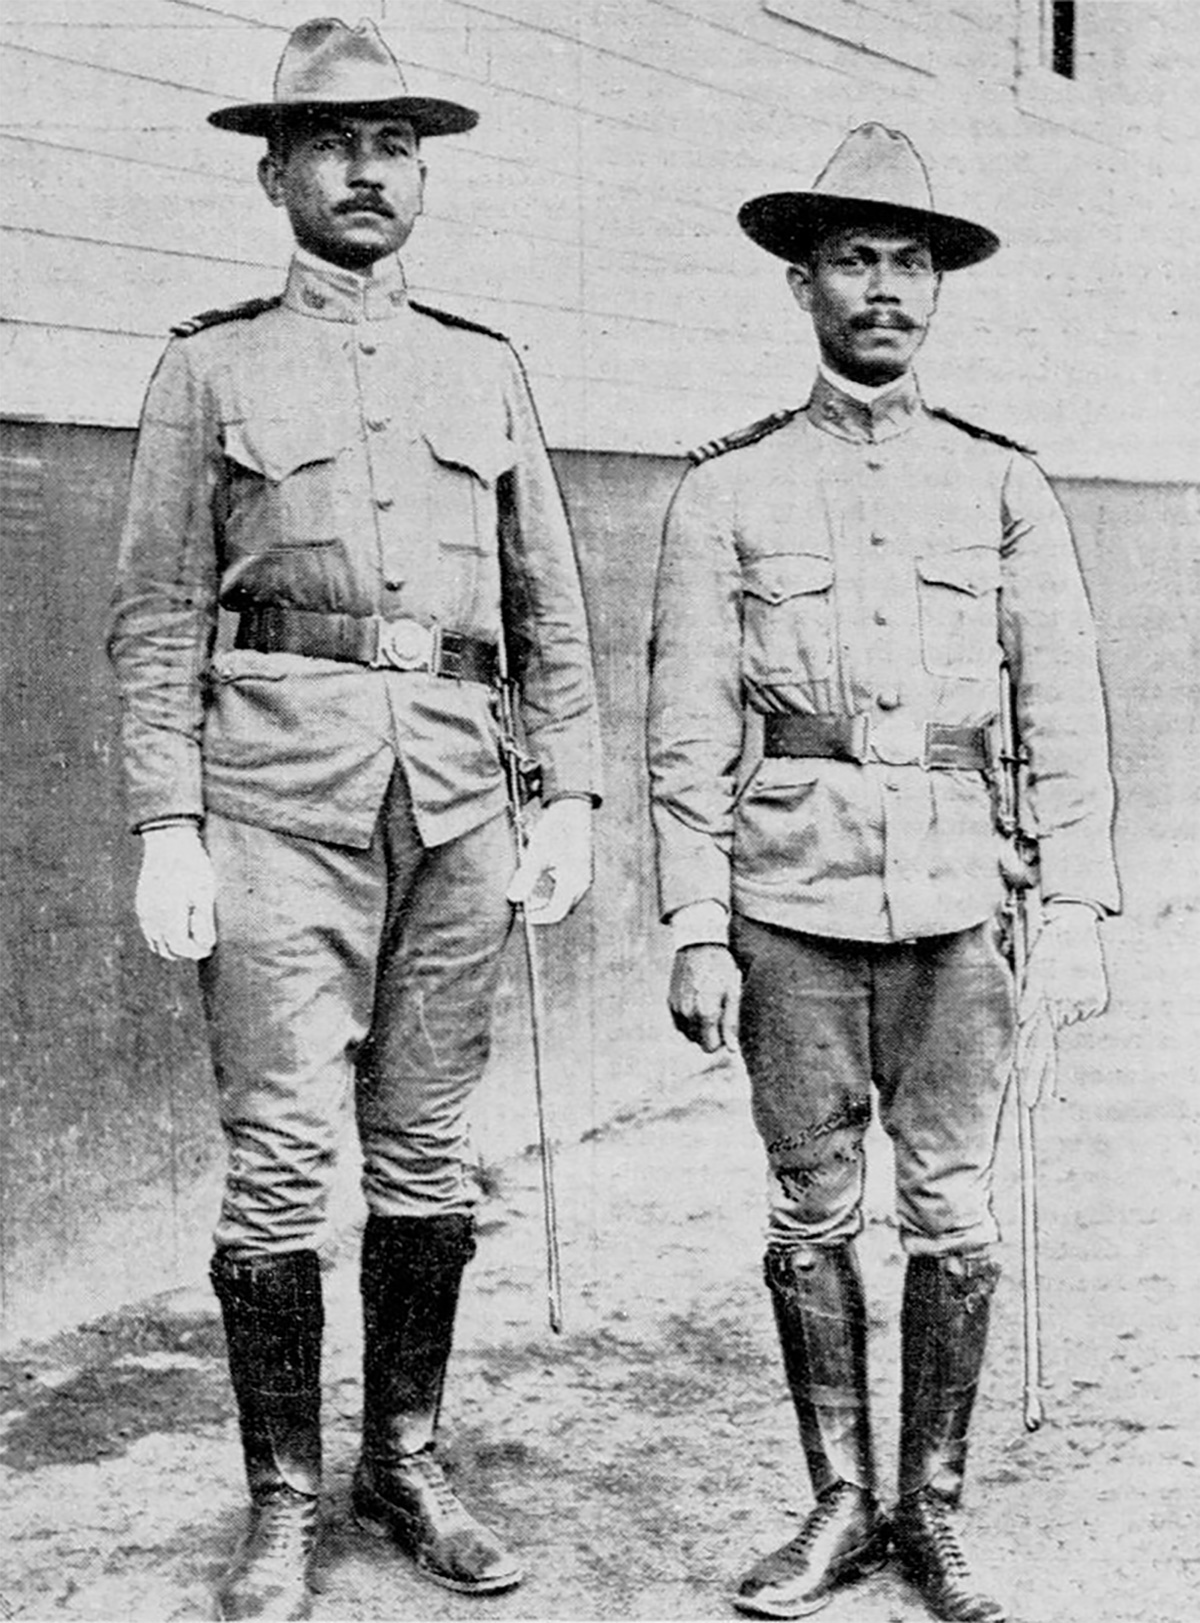 Two native Philippine Constabulary leaders from 1905